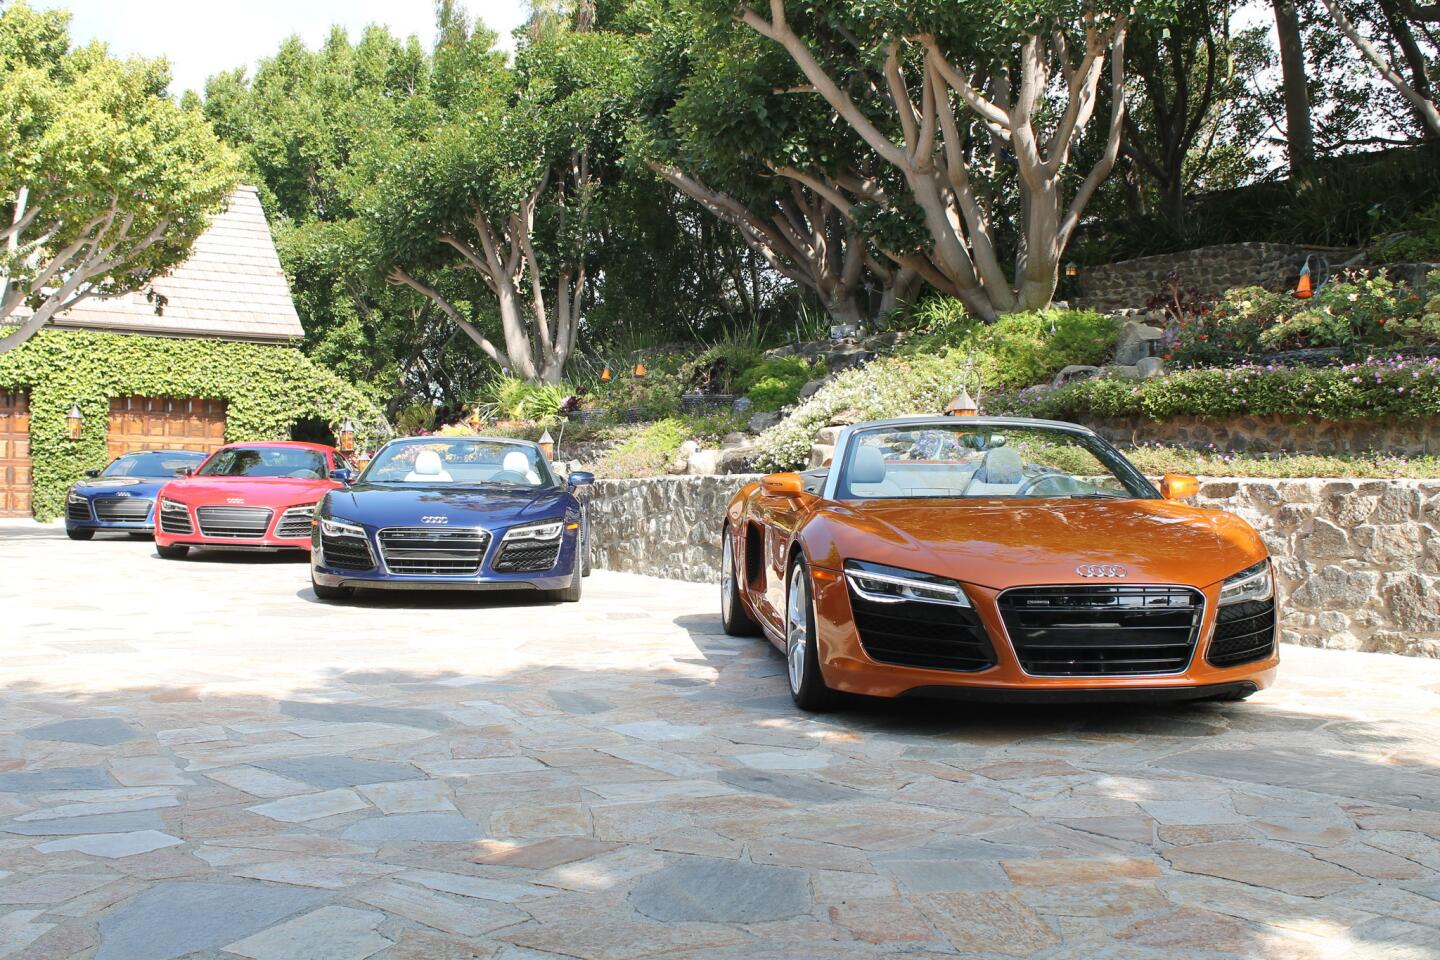 Audi's refreshed 2014 R8 lineup on display.